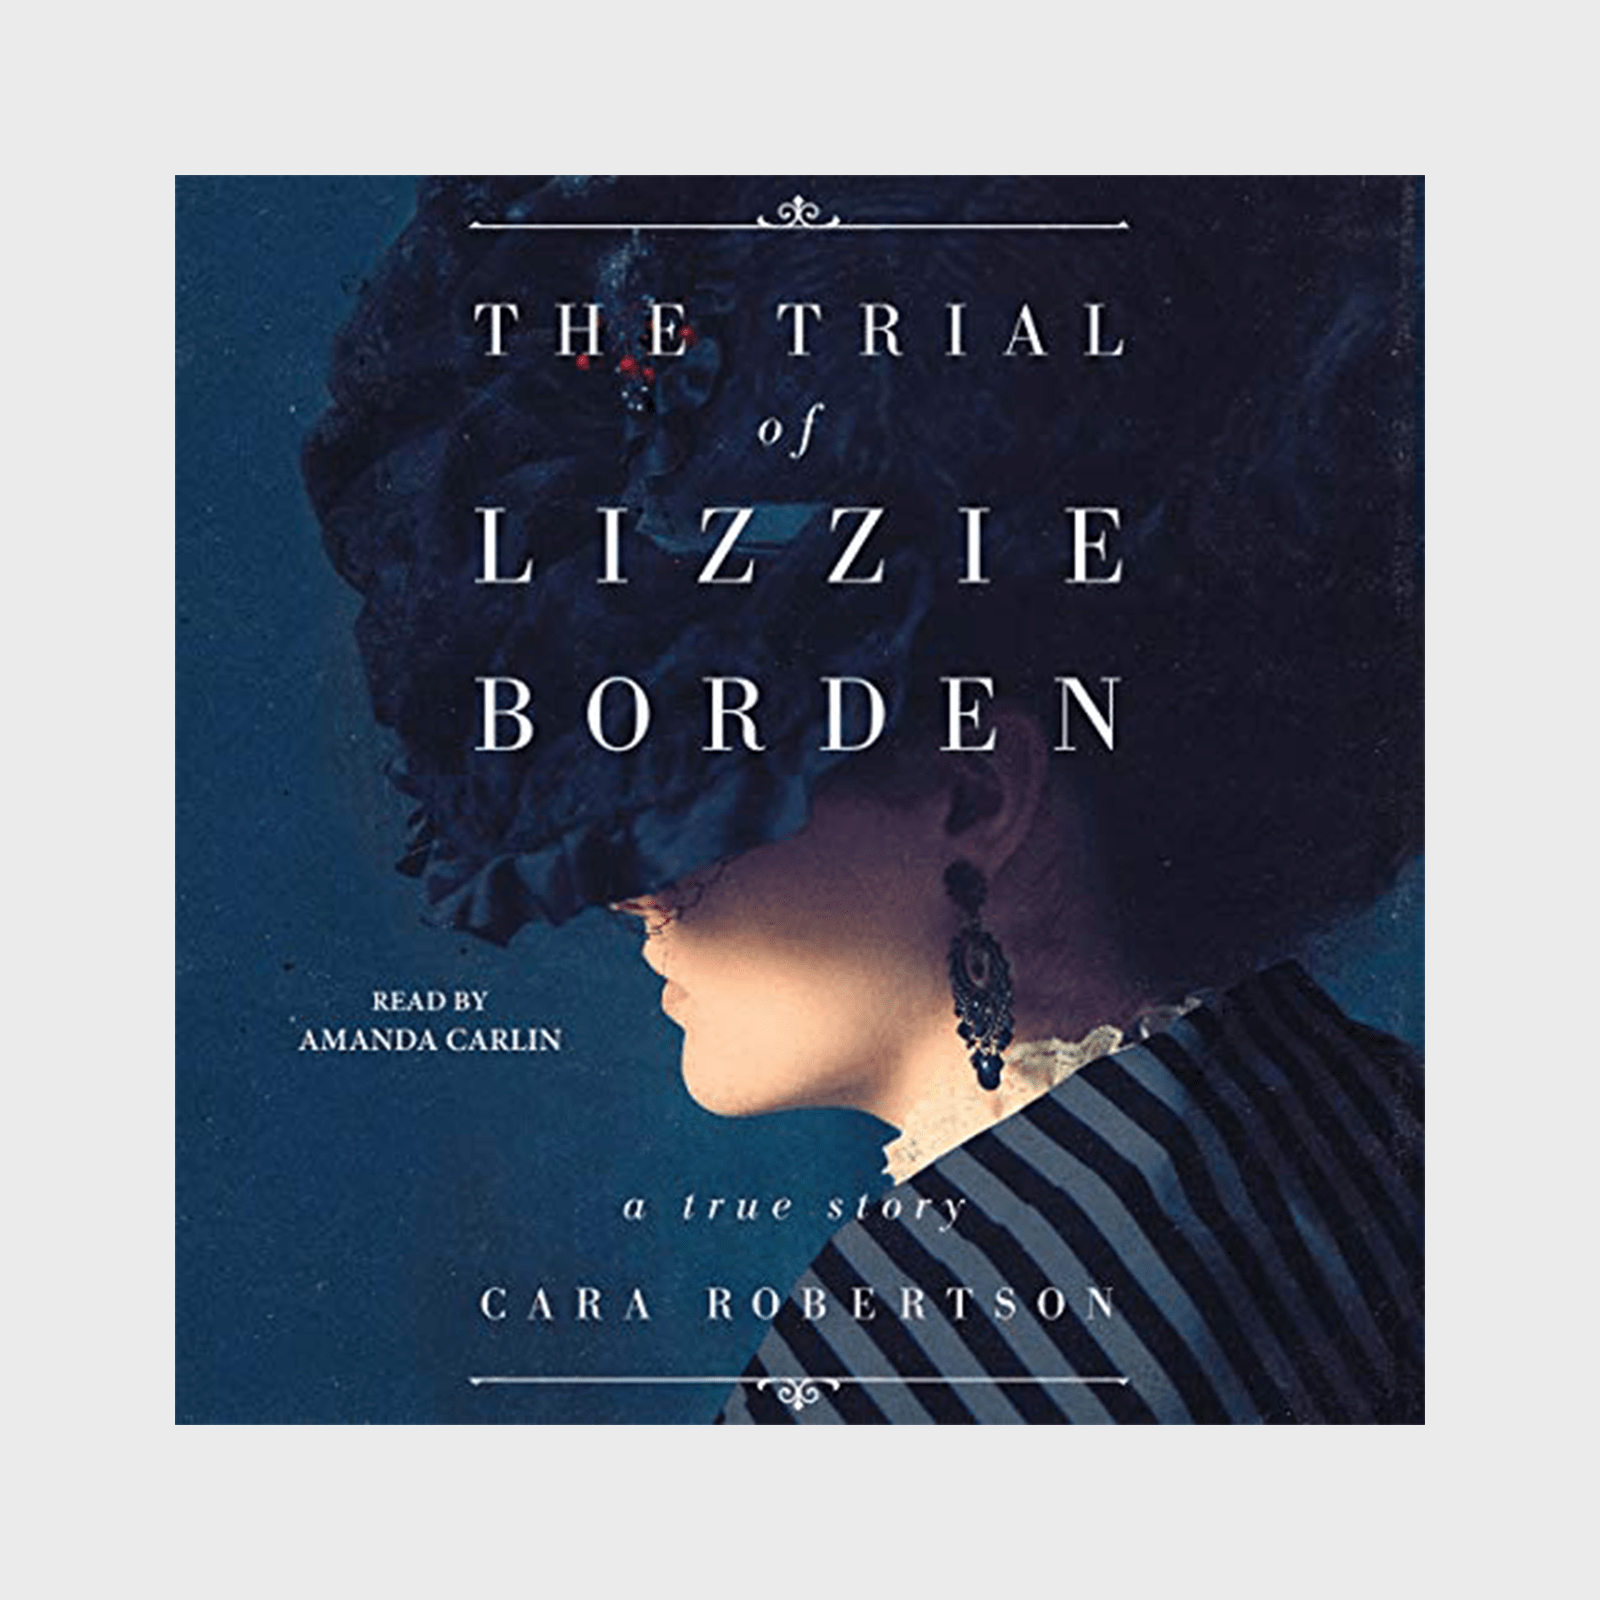 <h3><em>The Trial of Lizzie Borden </em>by Cara Robertson</h3> <p>If you think you know anything about <a href="https://www.amazon.com/The-Trial-of-Lizzie-Borden-audiobook/dp/B07H43L44T/" rel="noopener noreferrer">Lizzie Borden</a>, who went on trial for two grisly axe murders in 1892, think again. Author Cara Robertson dives into more than 20 years of research and newly unearthed evidence into the crime that enthralled the world. This story, hailed by <em>Publisher's Weekly</em>'s starred review as a "definitive account to date of one of America's most notorious and enduring murder mysteries," allows the listener to act as judge to the infamous Lizzie Borden.</p> <p class="listicle-page__cta-button-shop"><a class="shop-btn" href="https://www.amazon.com/The-Trial-of-Lizzie-Borden-audiobook/dp/B07H43L44T/">Shop Now</a></p>